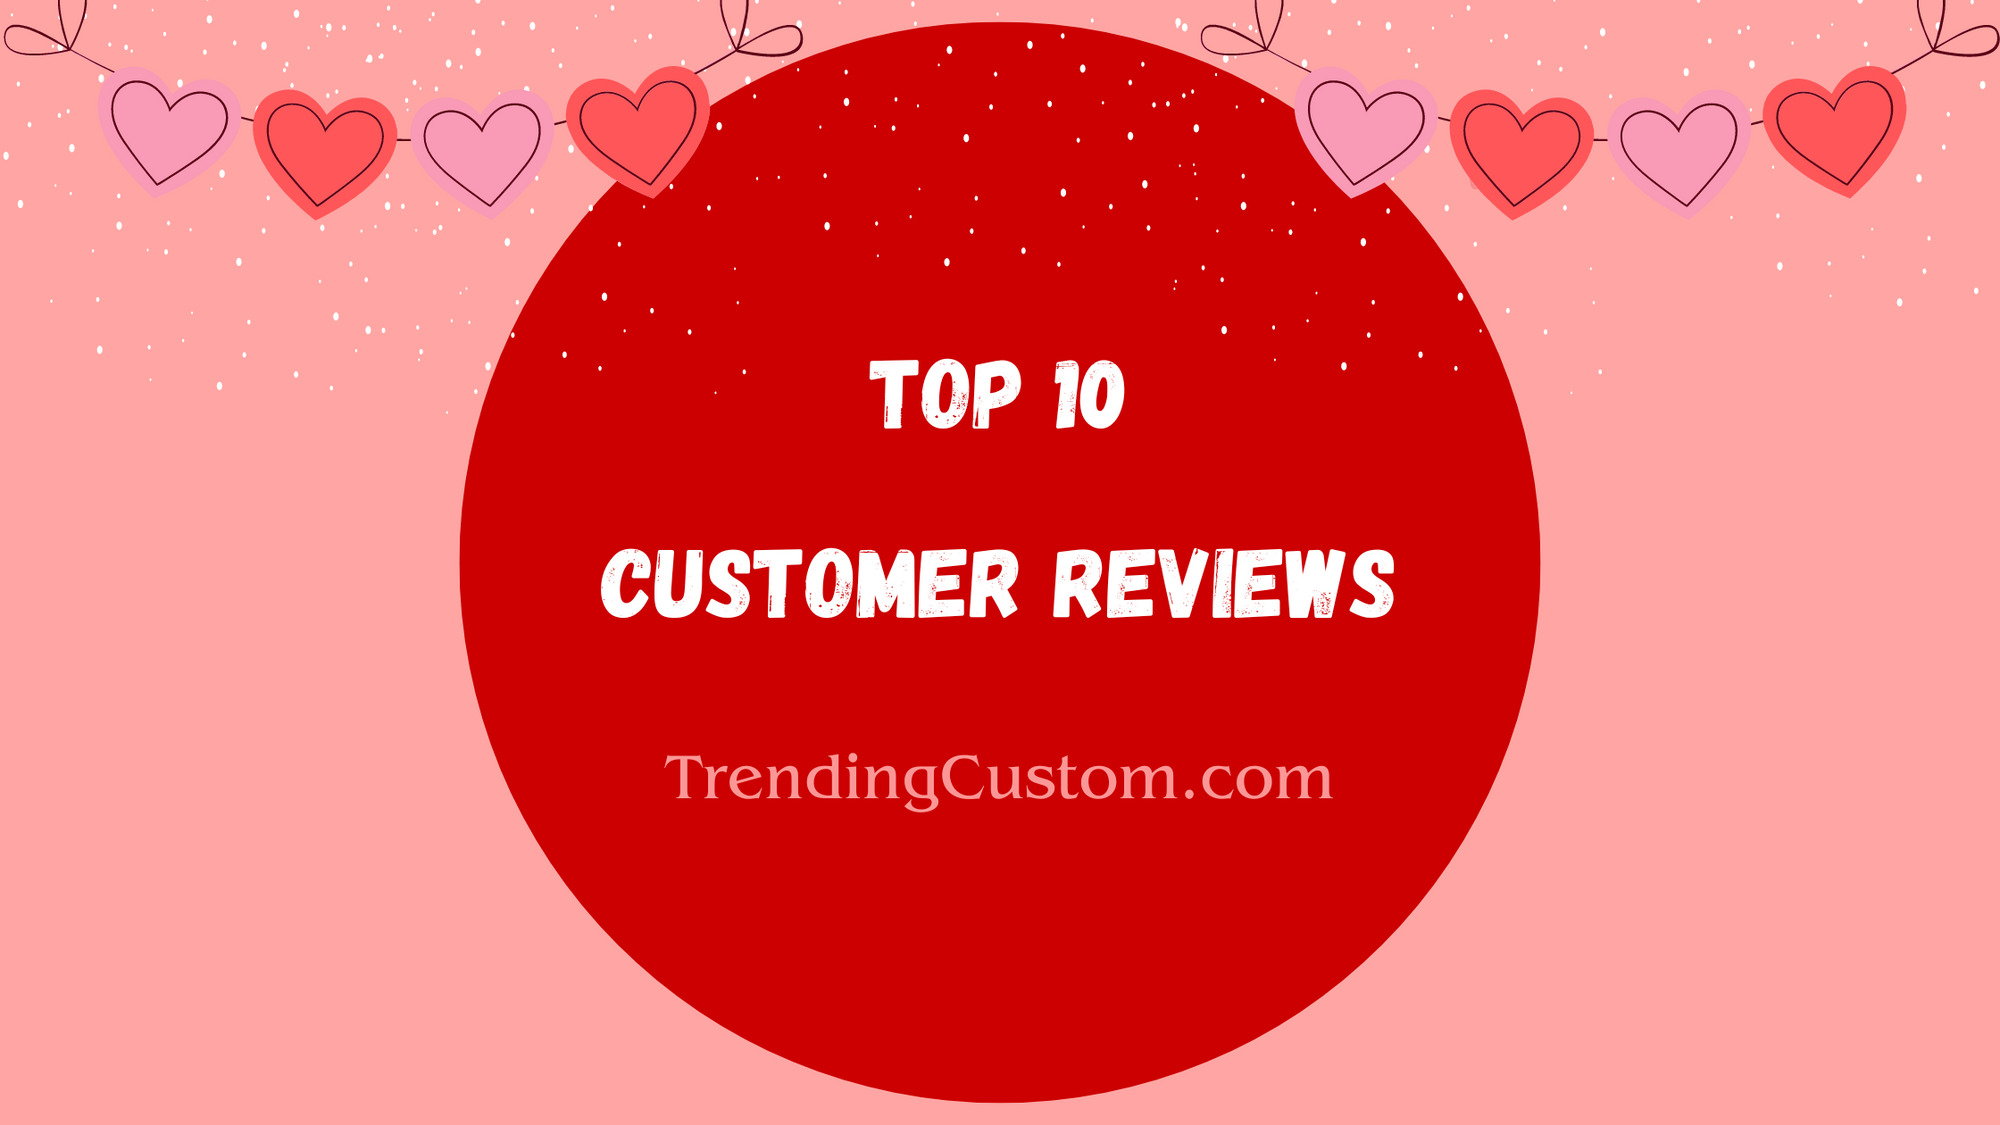 Top 10 Raving Reviews: Our Customers Speak Out! - February 4th